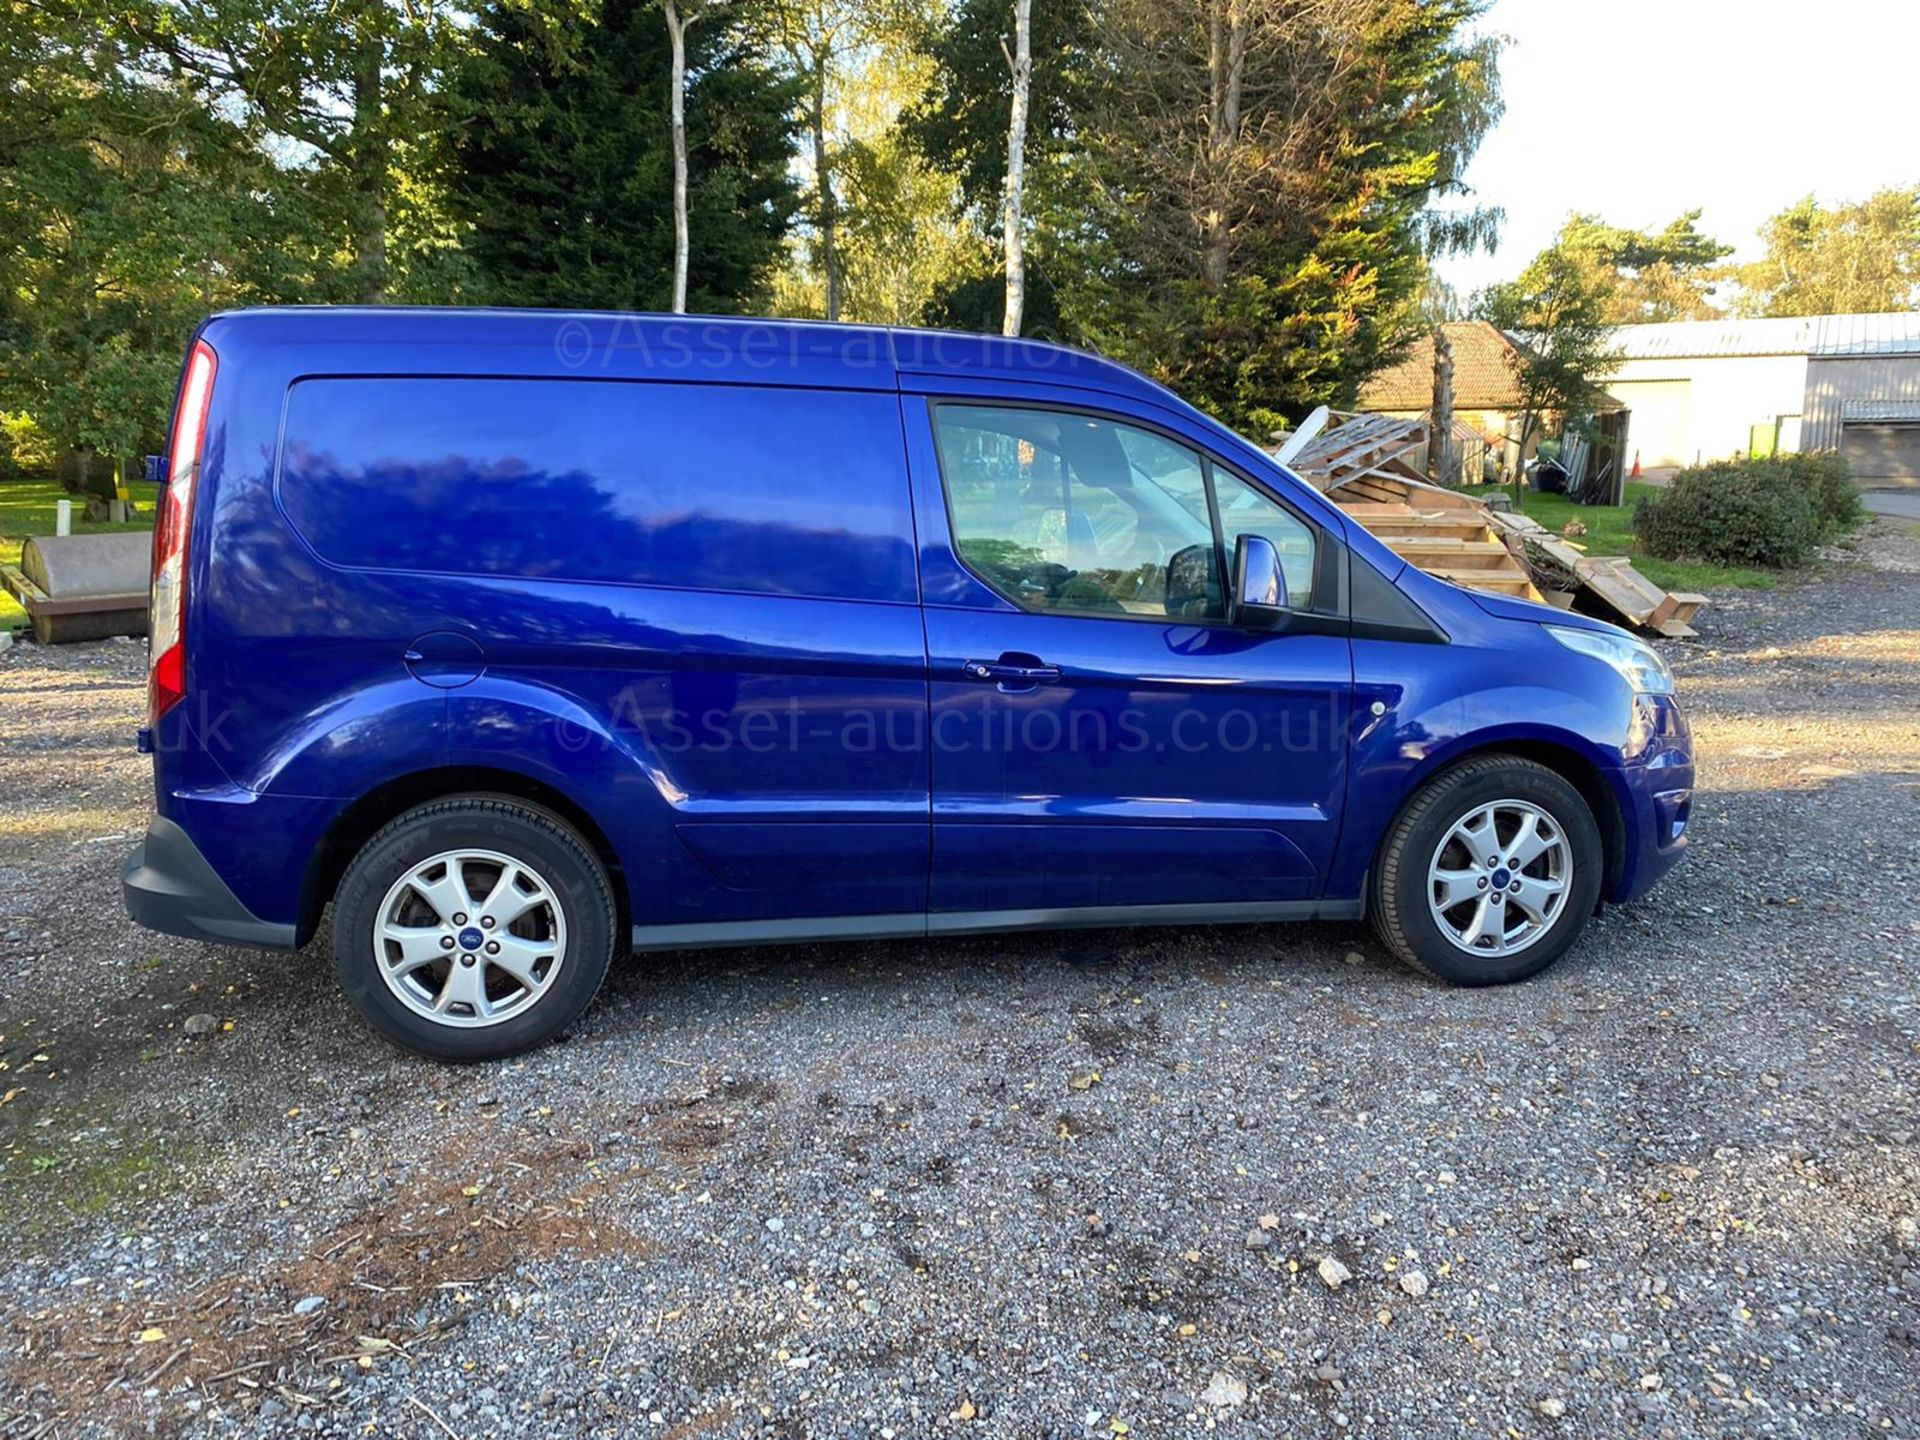 2016/66 FORD TRANSIT CONNECT 200 LIMITED BLUE PANEL VAN, 122K MILES WITH SERVICE HISTORY *PLUS VAT* - Image 6 of 10